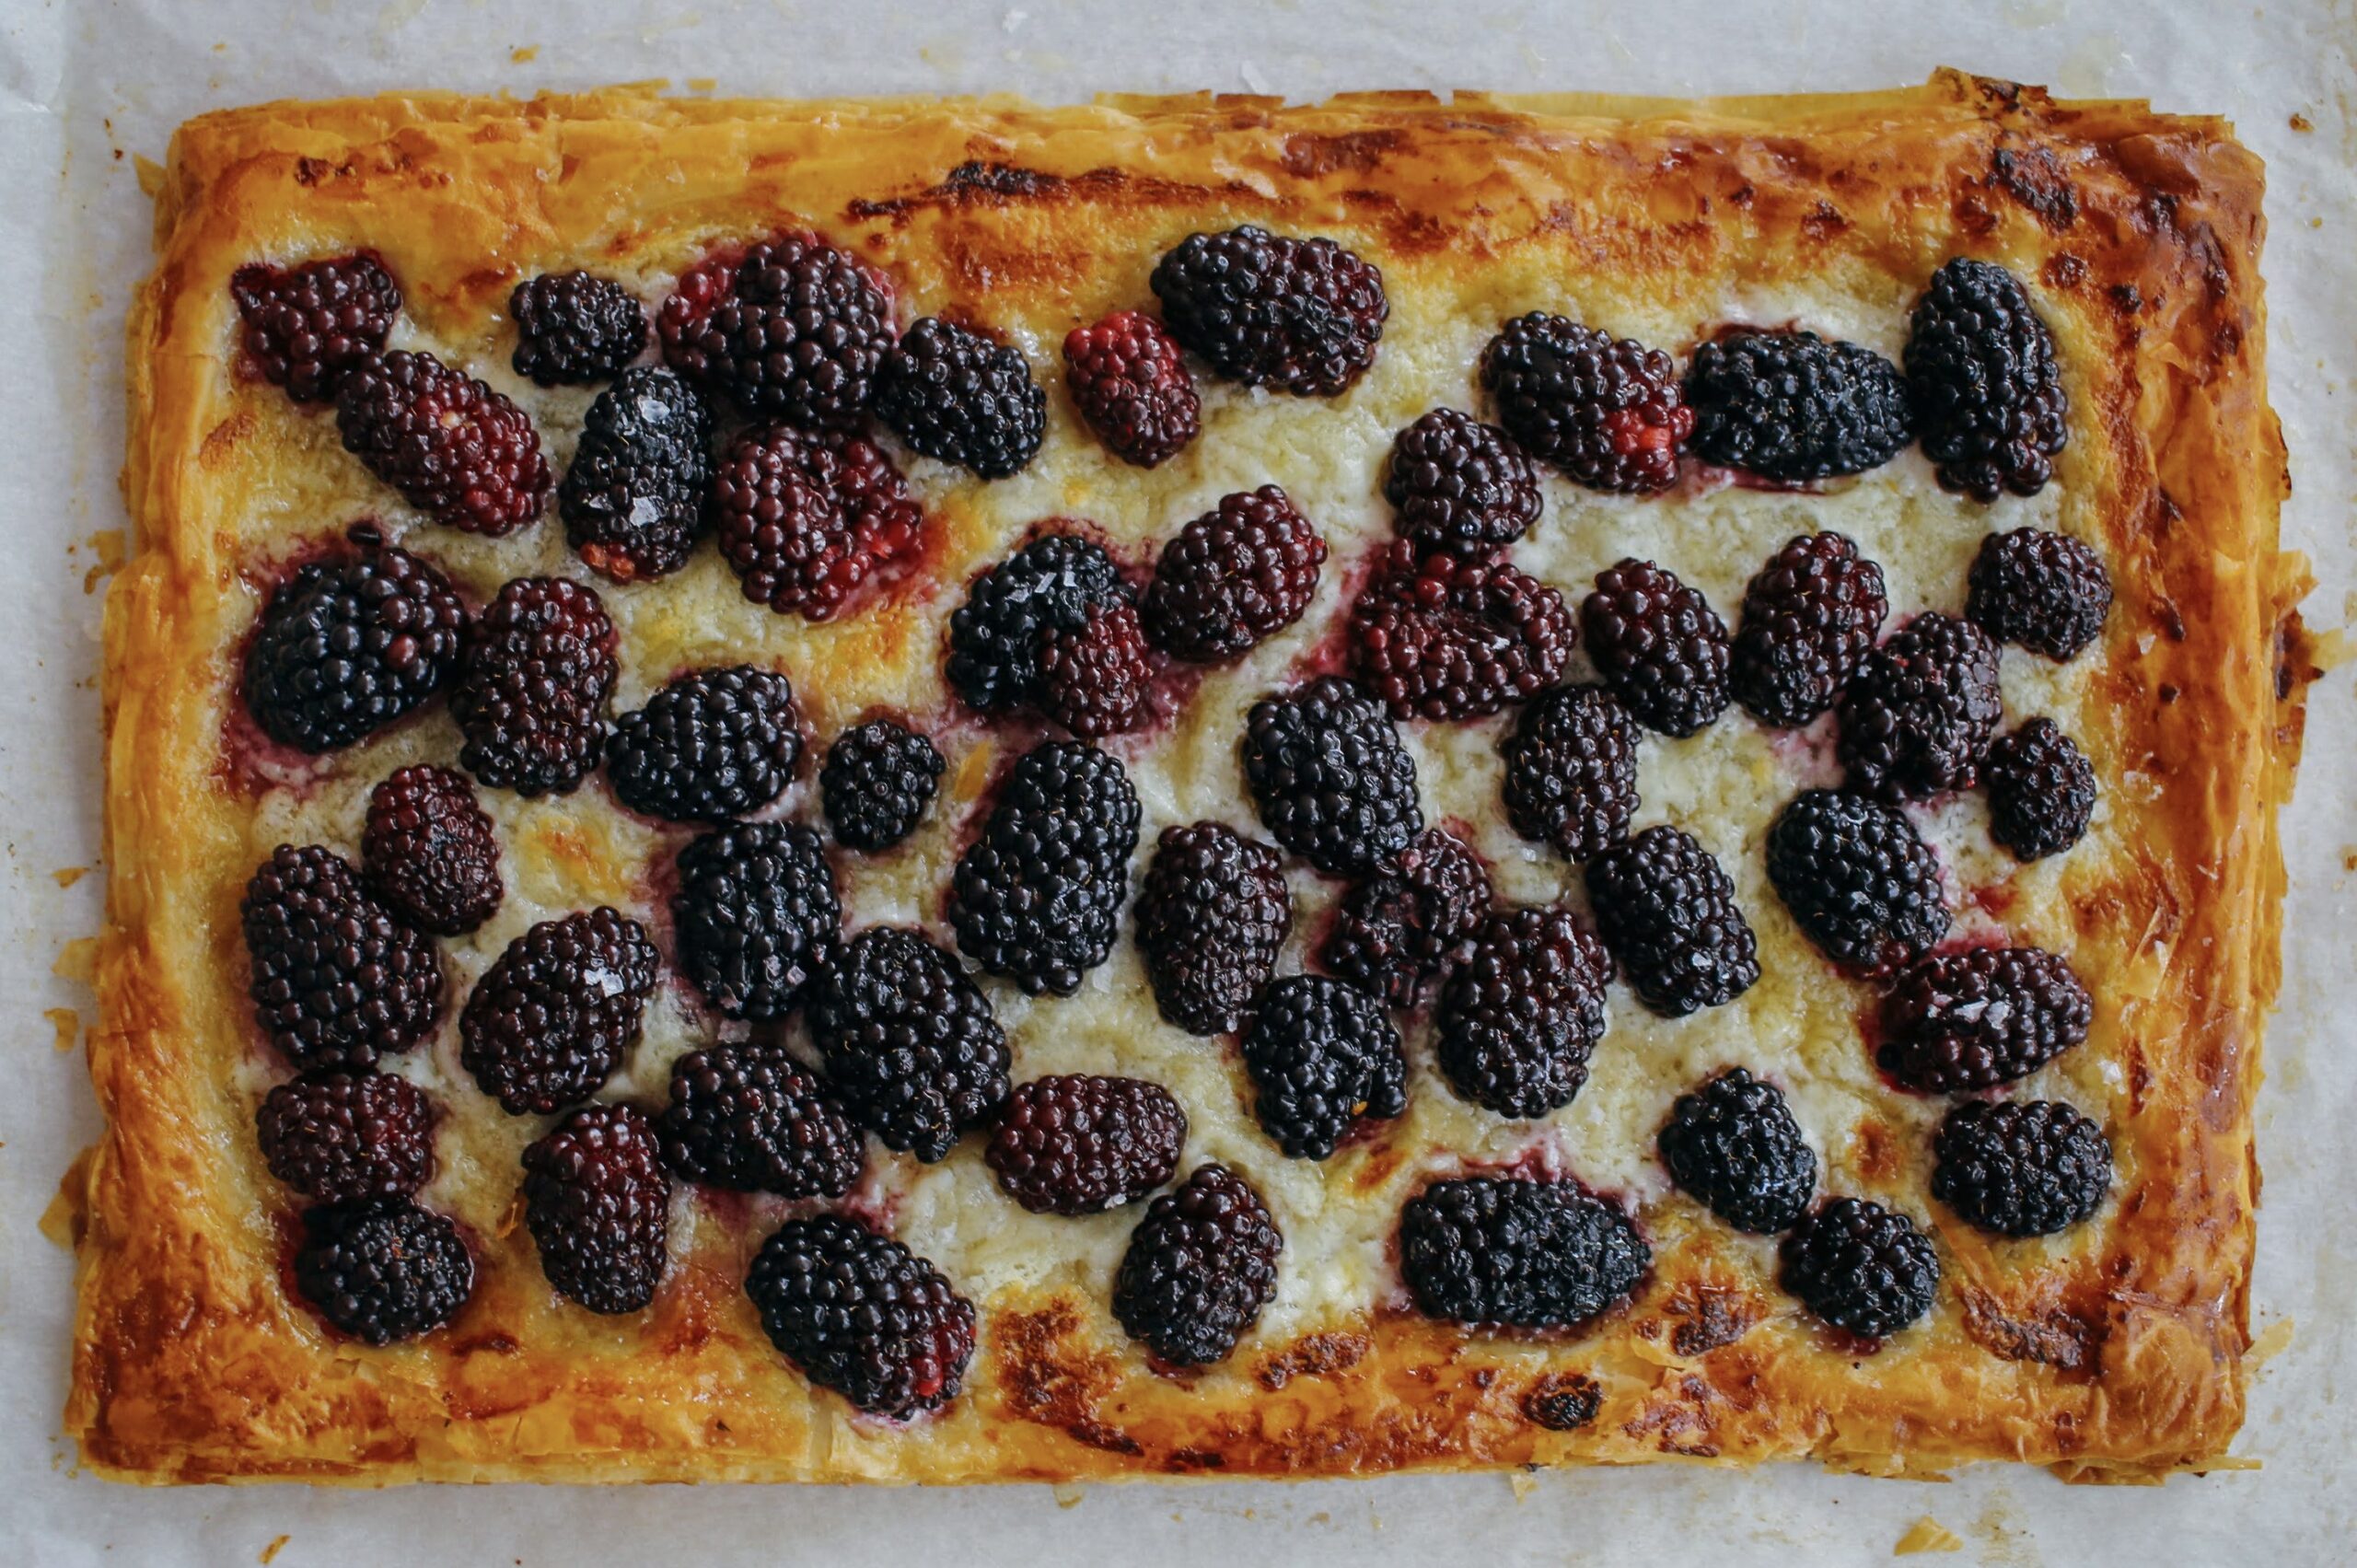 A pizza with blackberries on top of it.